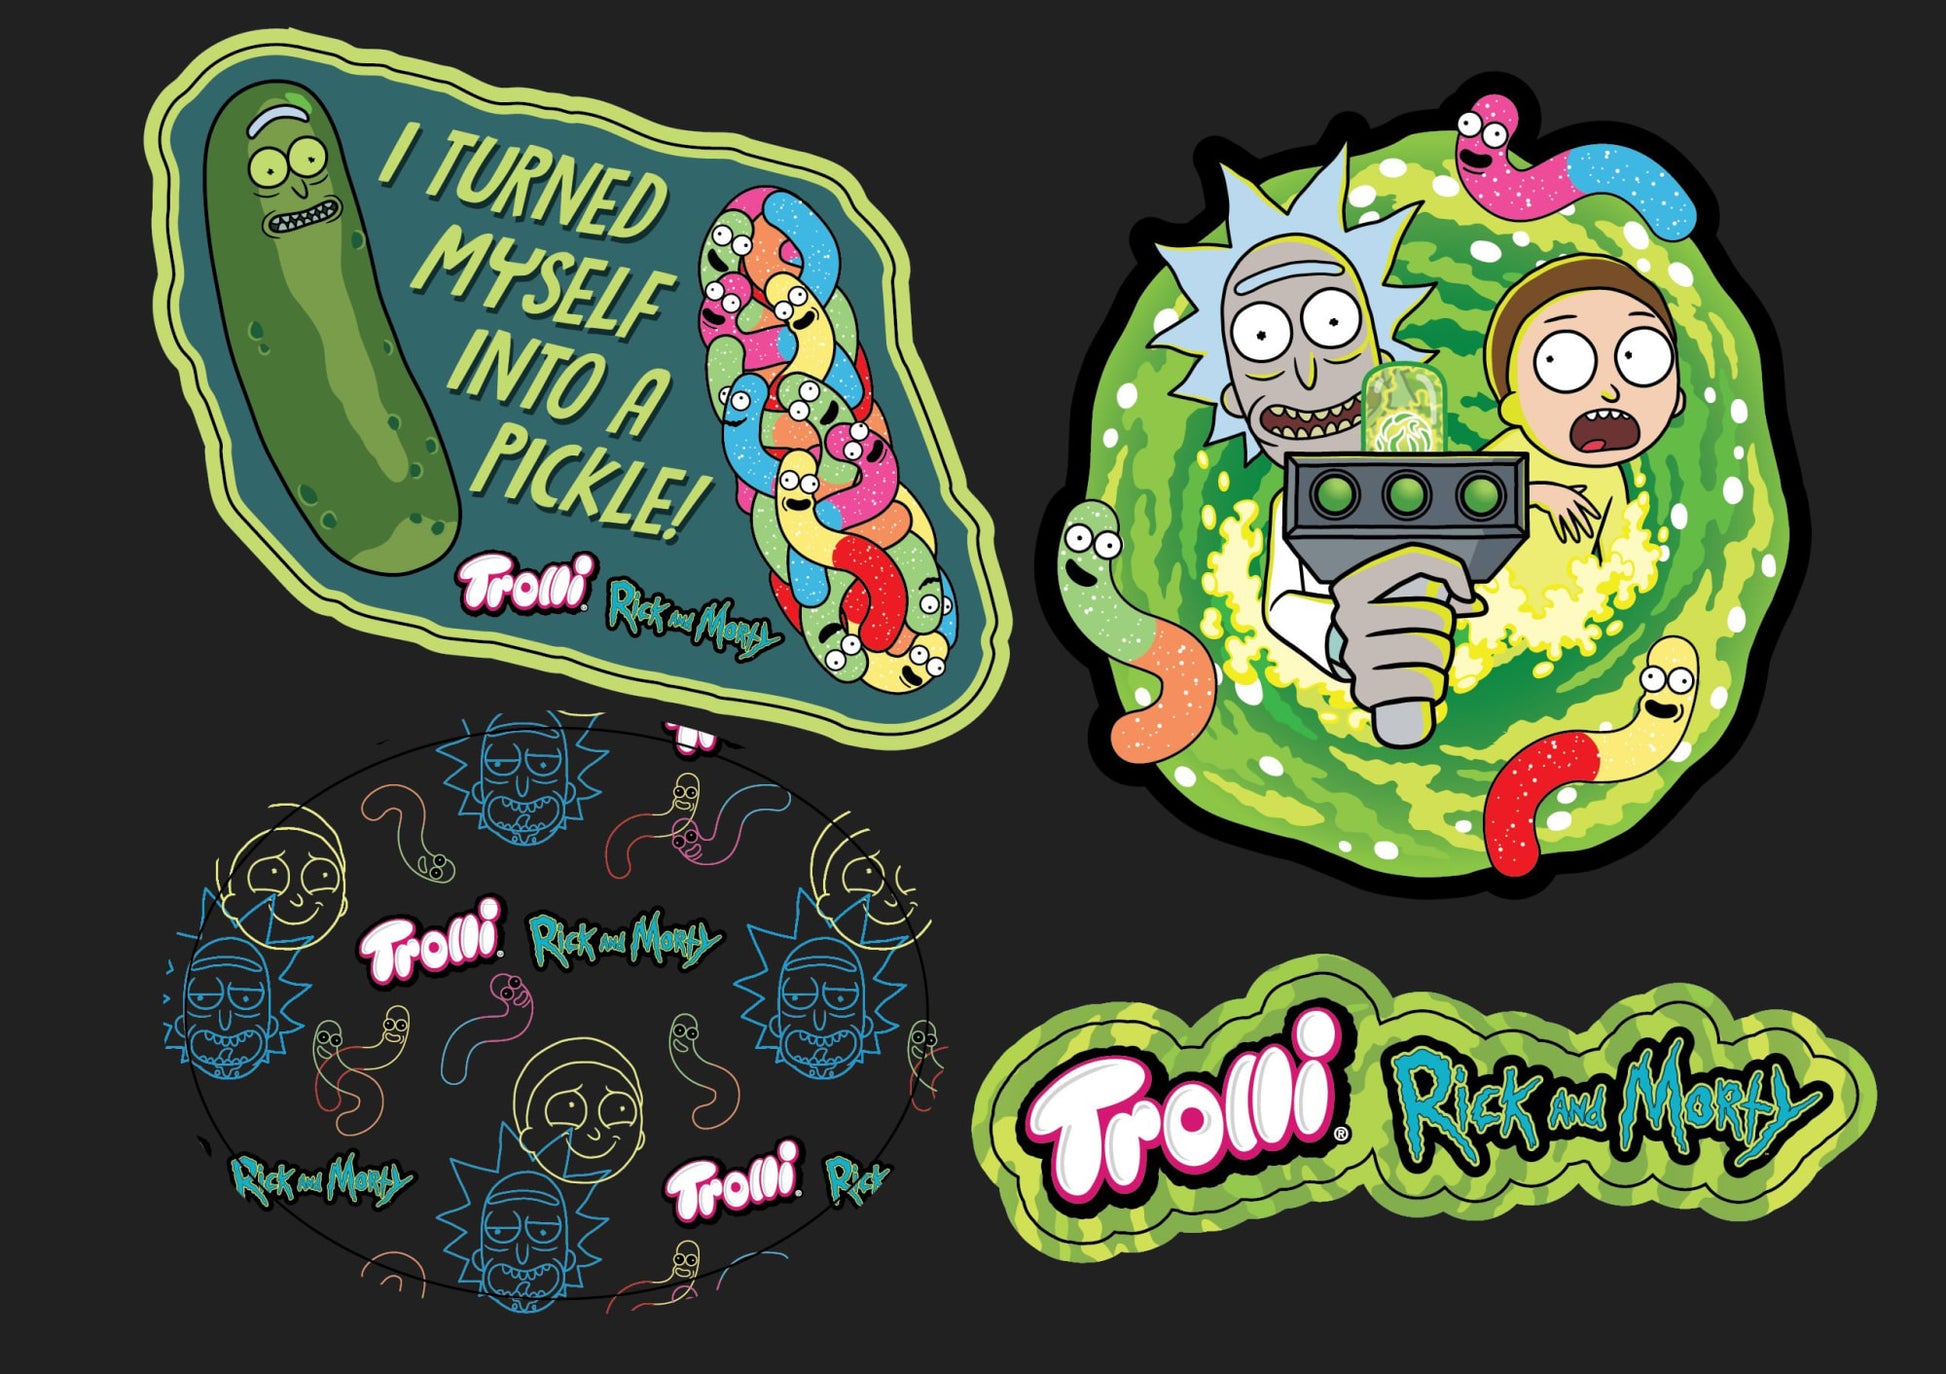 Trolli Rick and Morty Limited Edition candy online caramelle Rick and Morty stuff